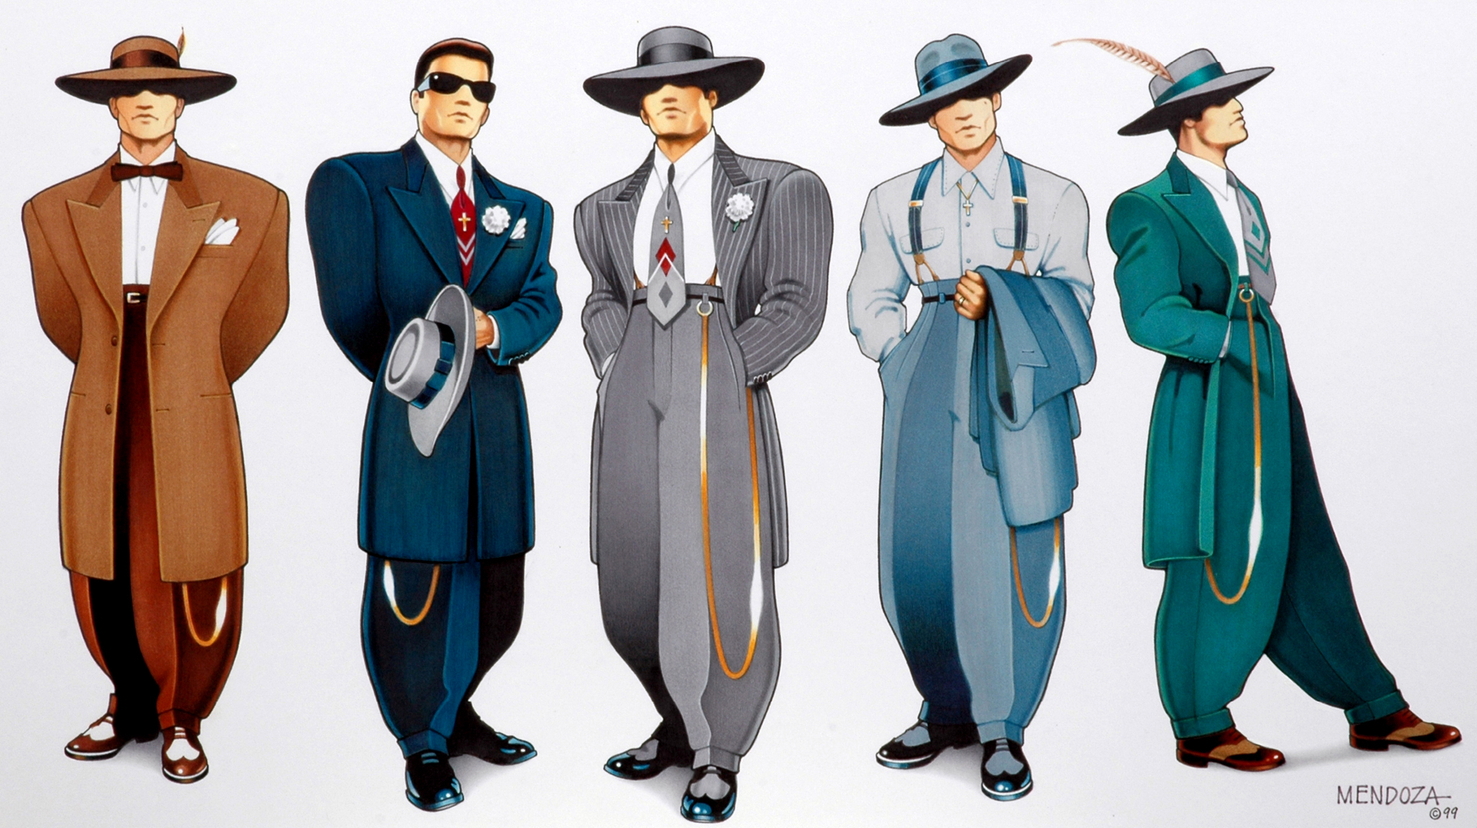 Zoot Suit Movie Poster by BobTheDragon on DeviantArt